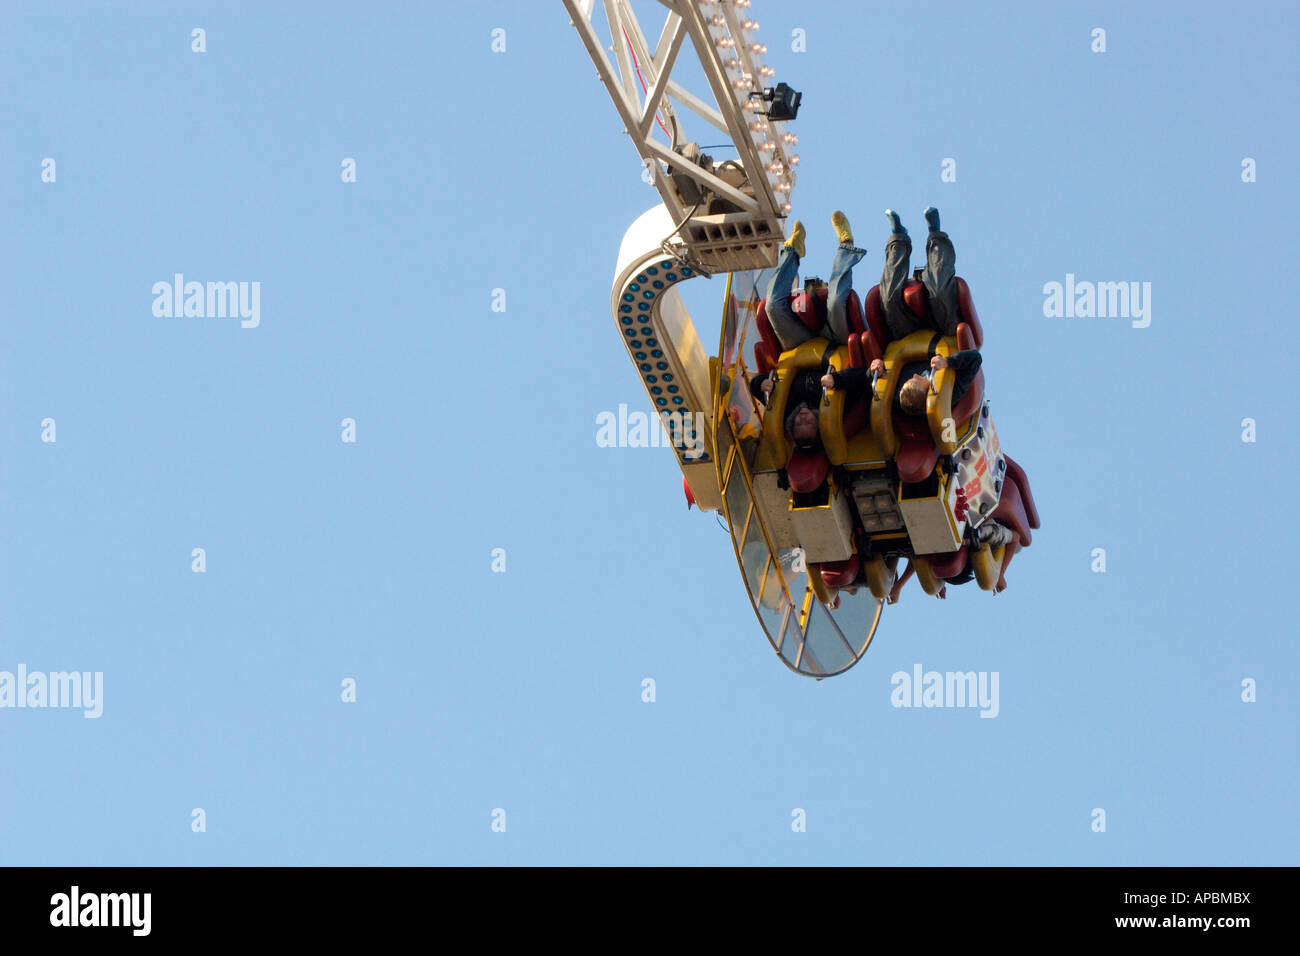 People on a Booster Bomber ride at a fairground, UK Stock Photo - Alamy